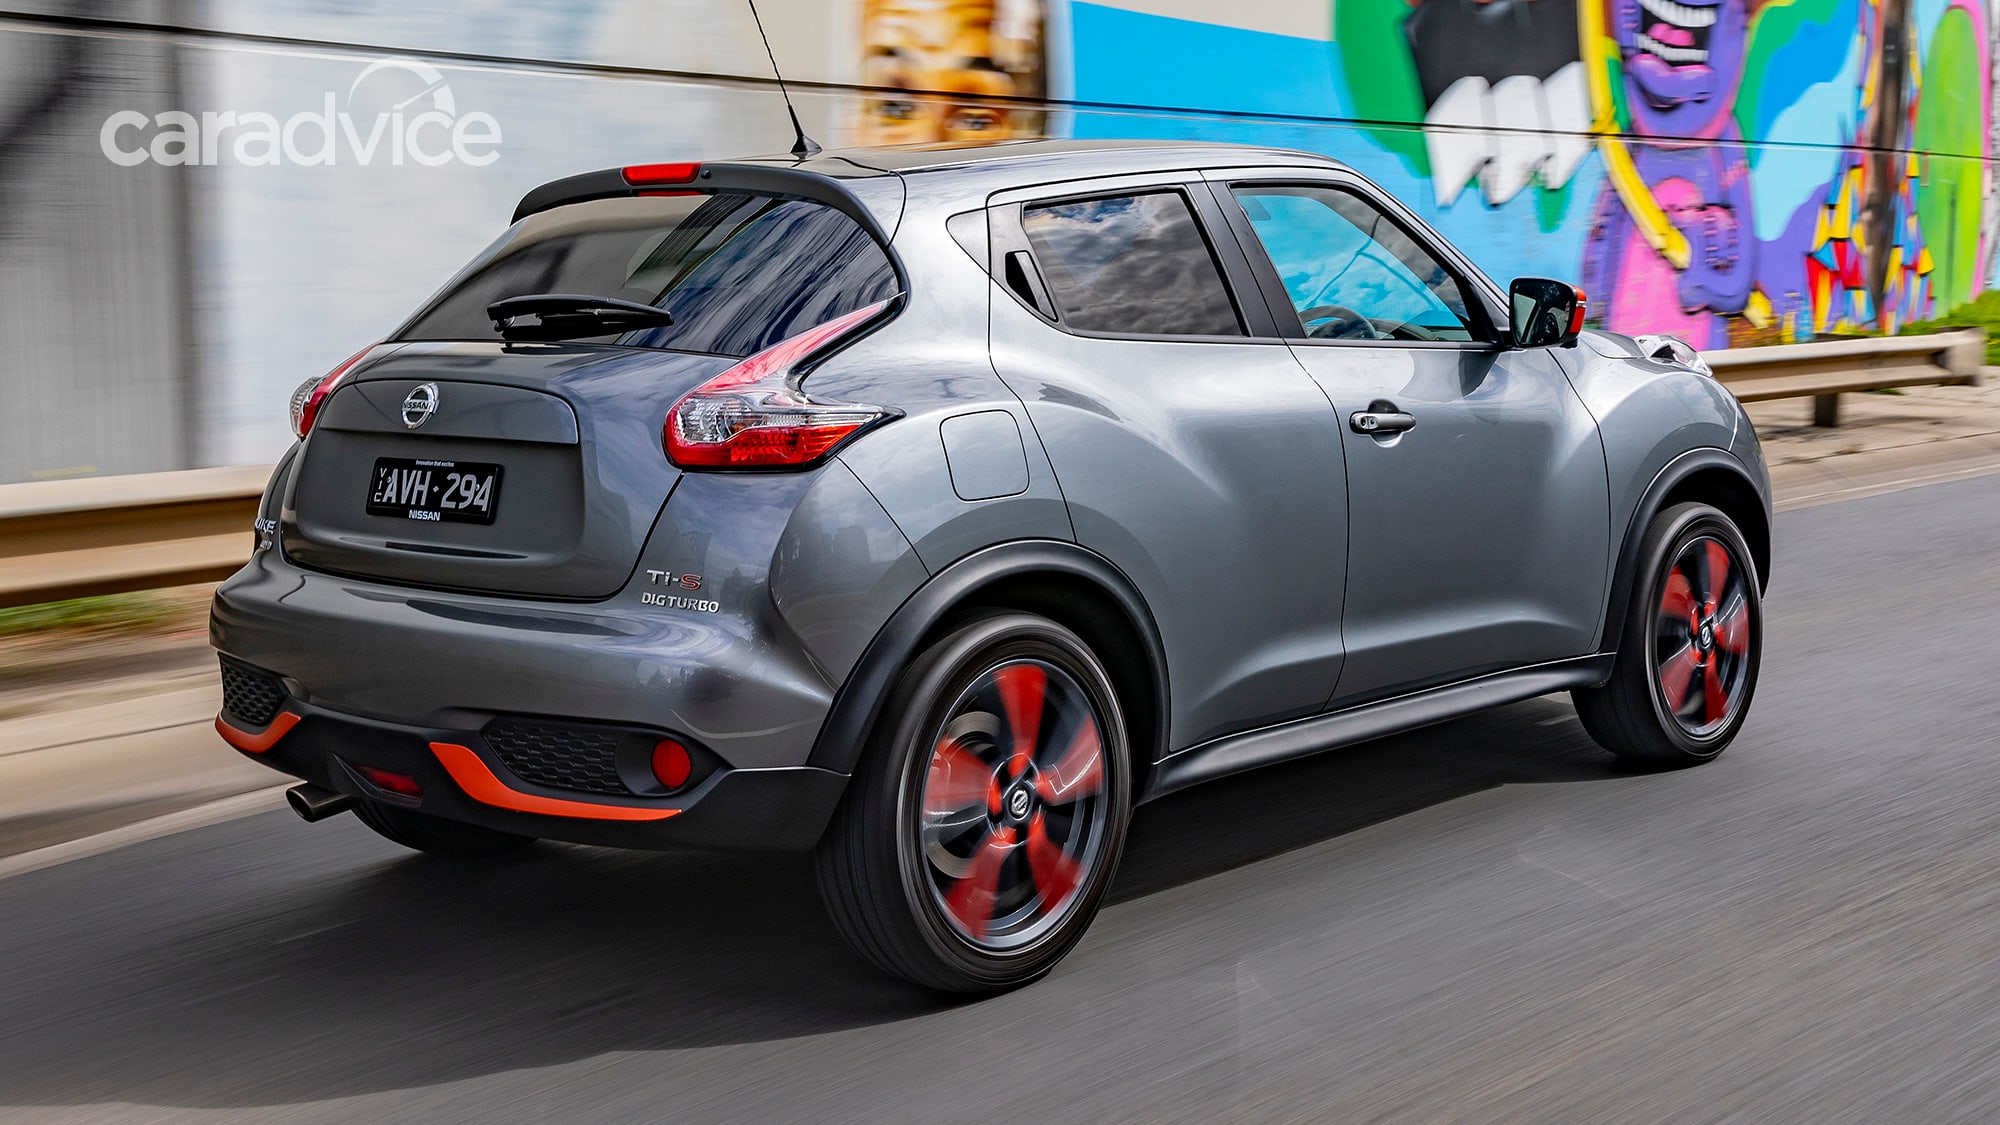 2019 Nissan Juke pricing and specs CarAdvice